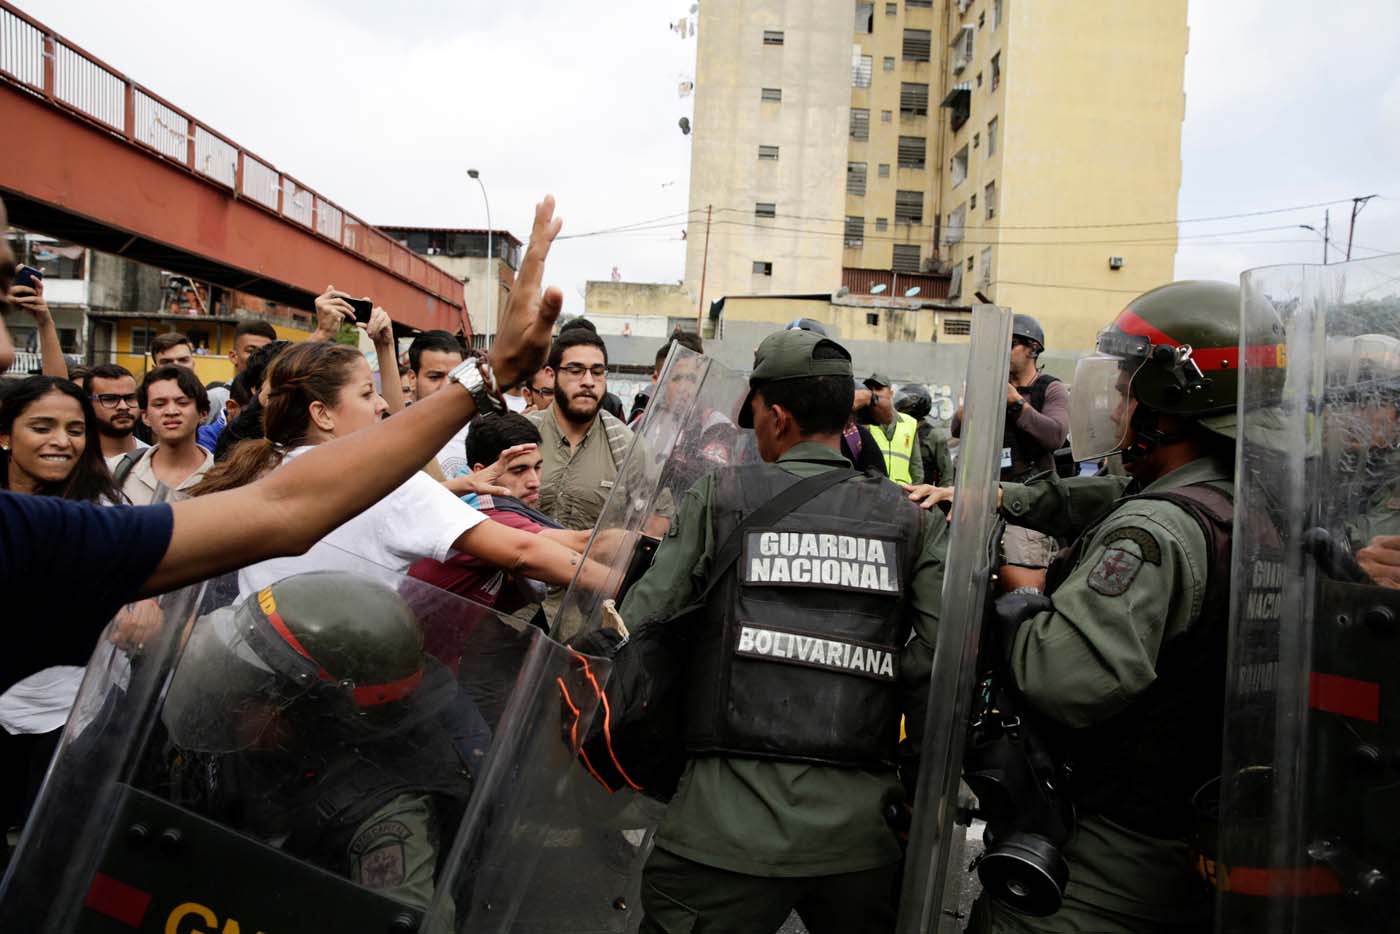 Opposition supporters clash with Venezuela's National Guards during a protest against Venezuelan President Nicolas Maduro's government outside the Supreme Court of Justice (TSJ) in Caracas, Venezuela March 31, 2017. REUTERS/Marco Bello